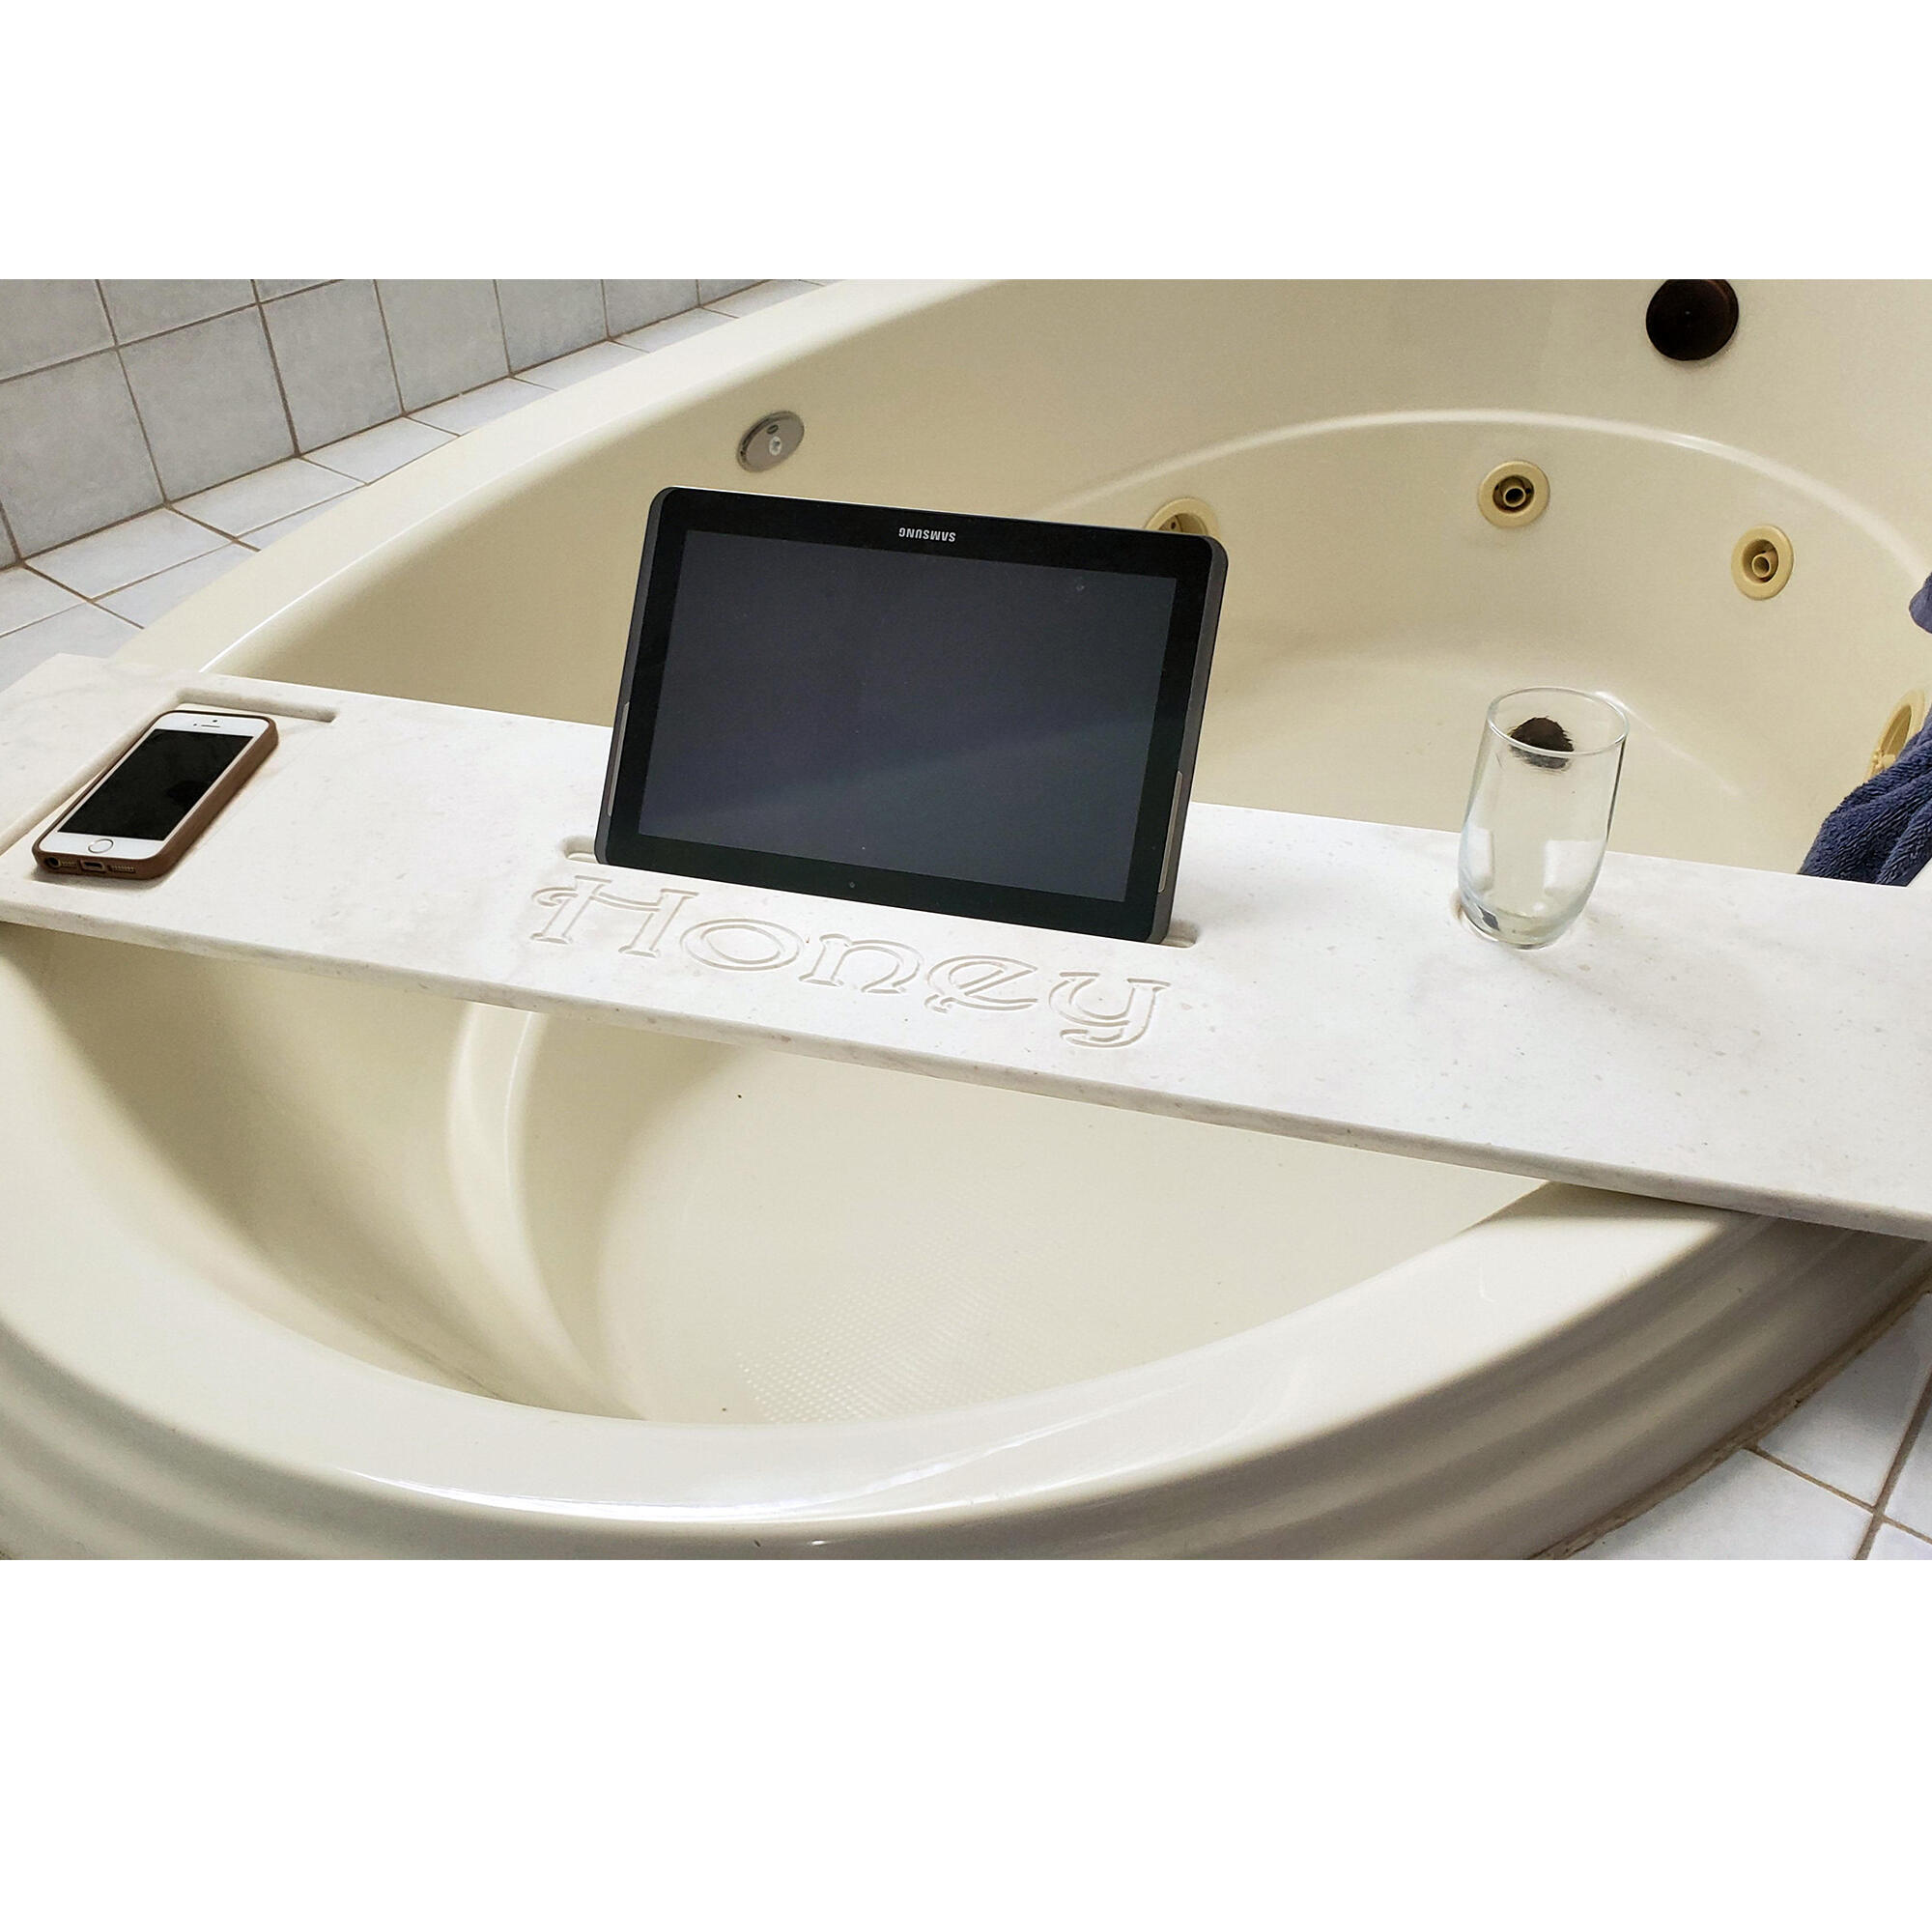 X-large 46-50 X 8 Bath Tub Tray Custom Made to Order Corian Caddy Tablet  Cell Phone iPad Candles Relax Mom Garden Jacuzzi Hot Spa 112-33 